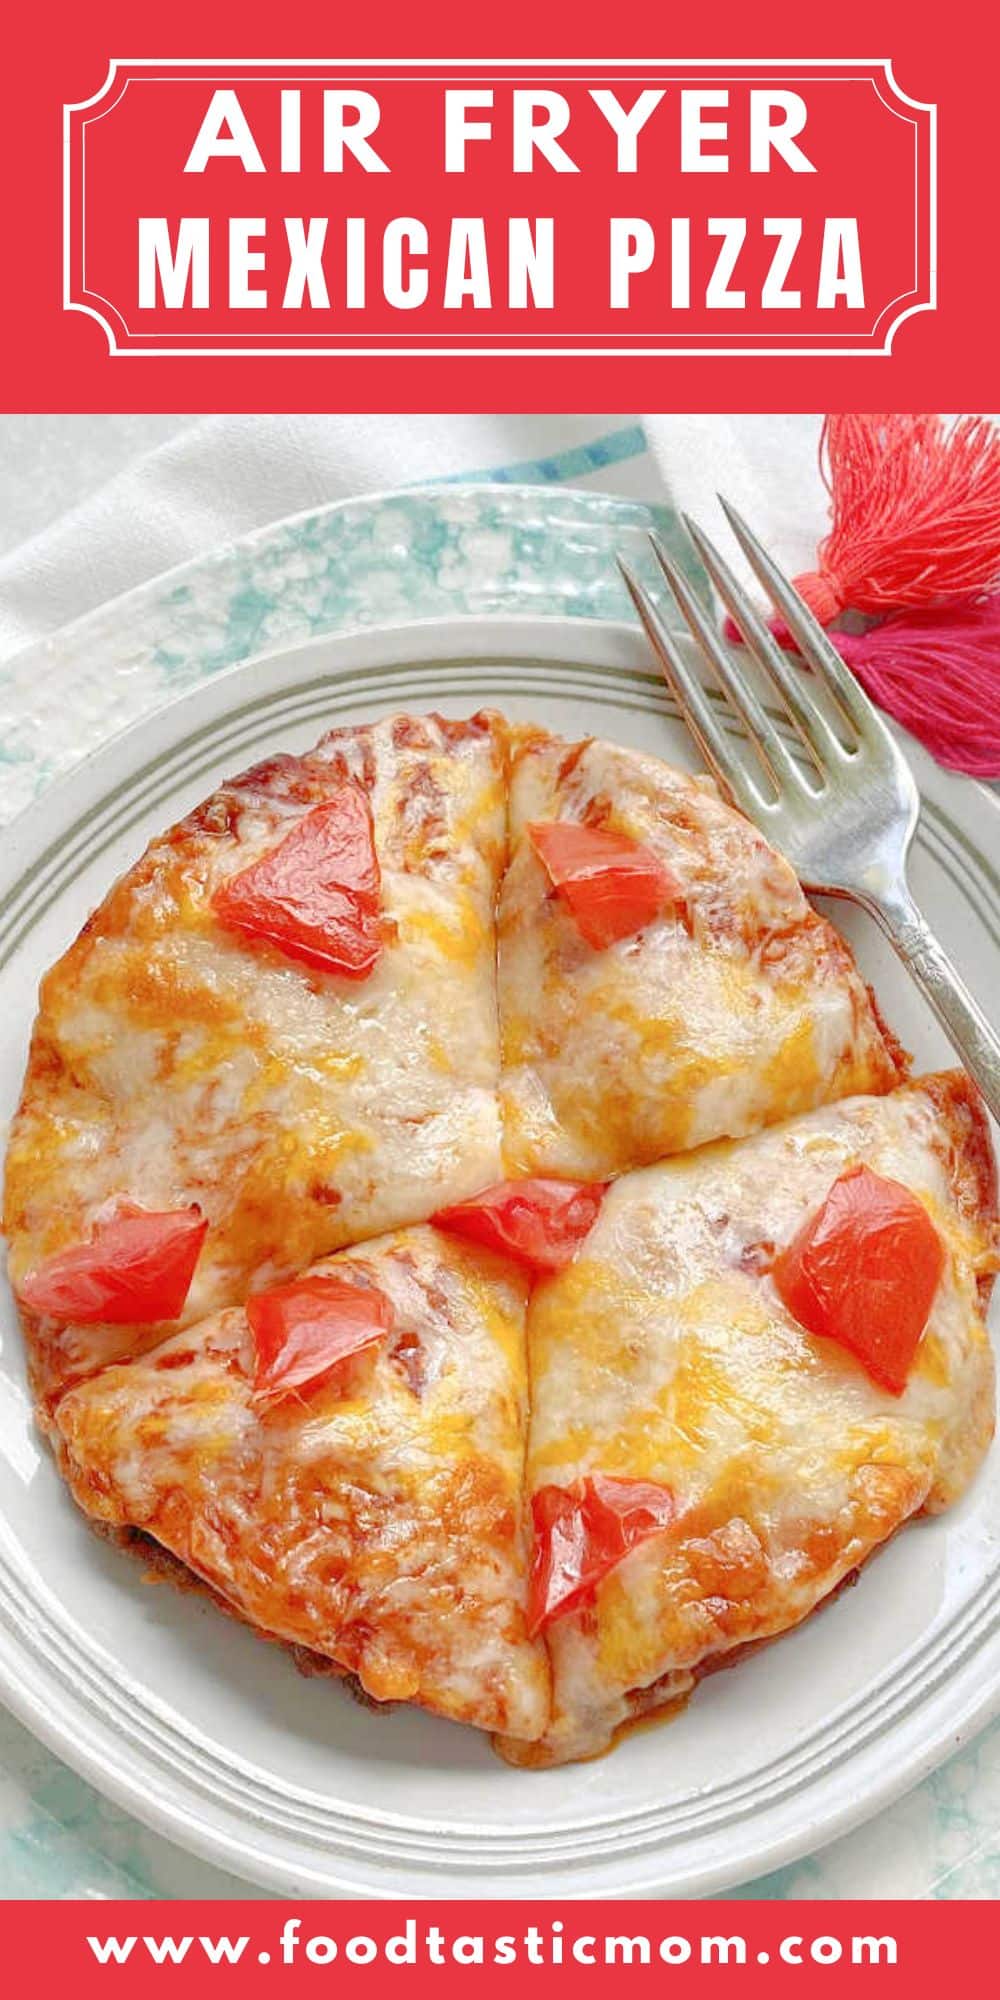 This Air Fryer Mexican Pizza is easy to make and sure to satisfy your craving. It tastes almost exactly like the one Taco Bell used to sell. via @foodtasticmom